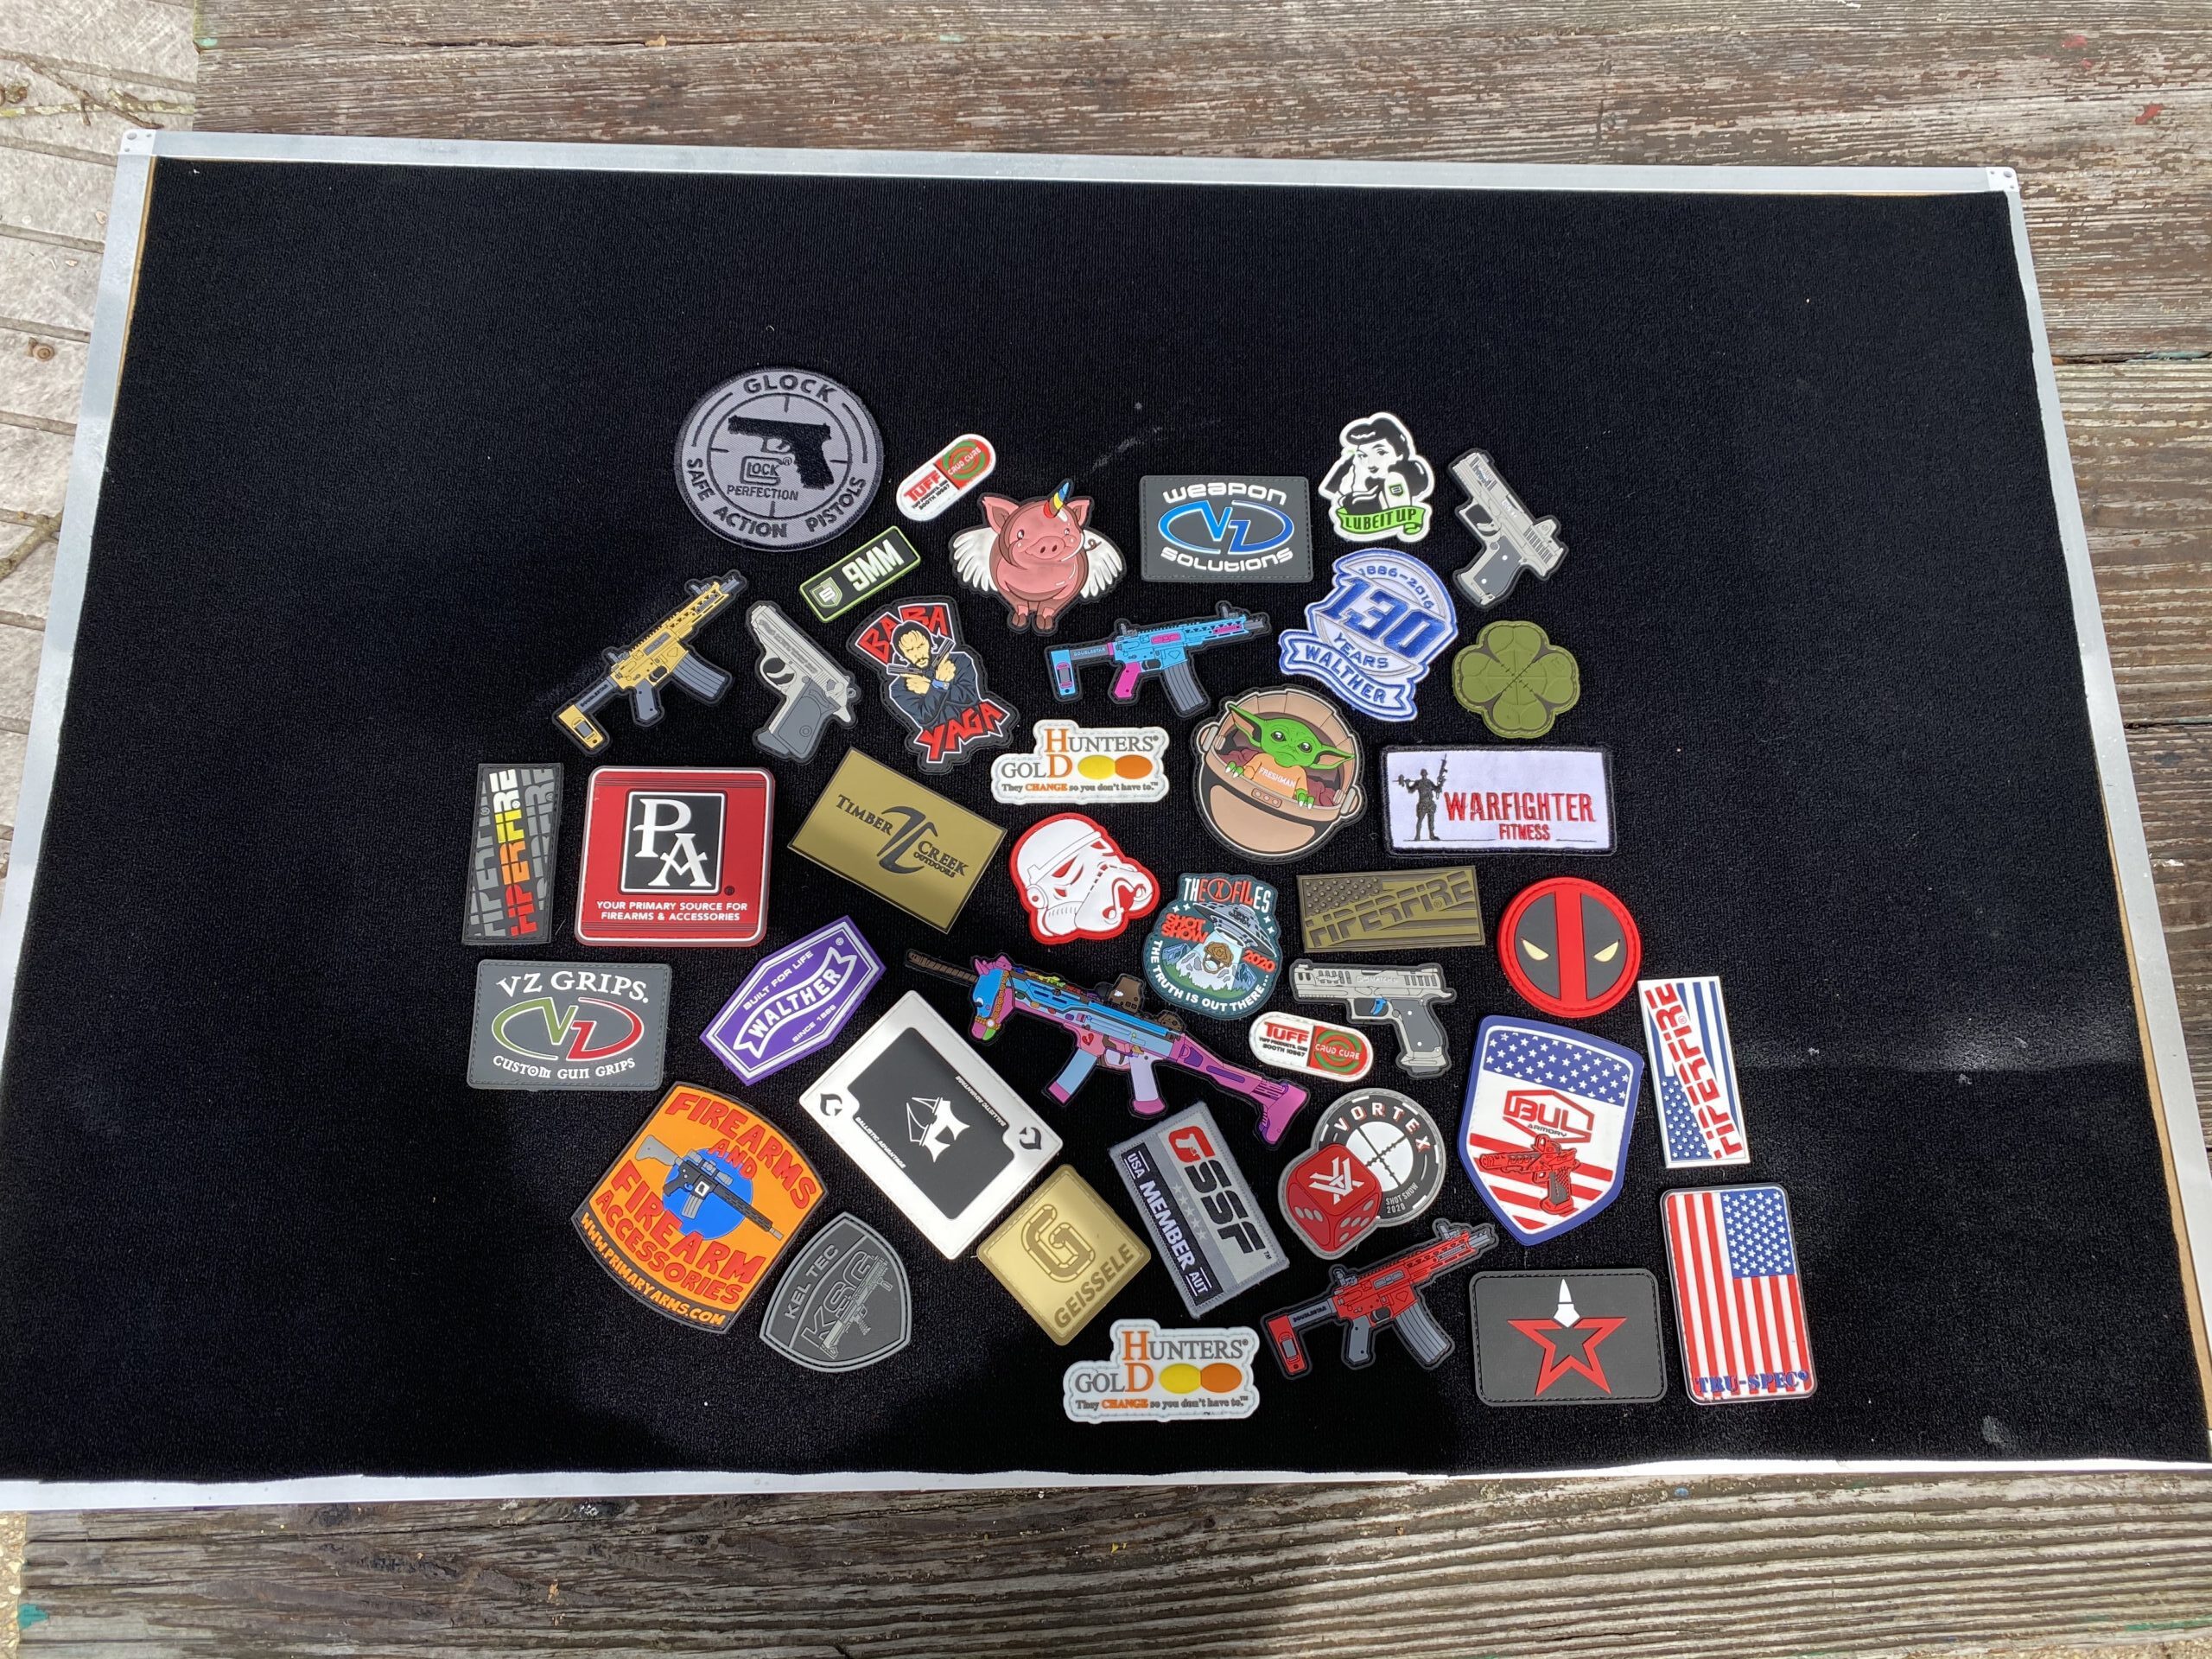 How to Build a Morale Patch Wall